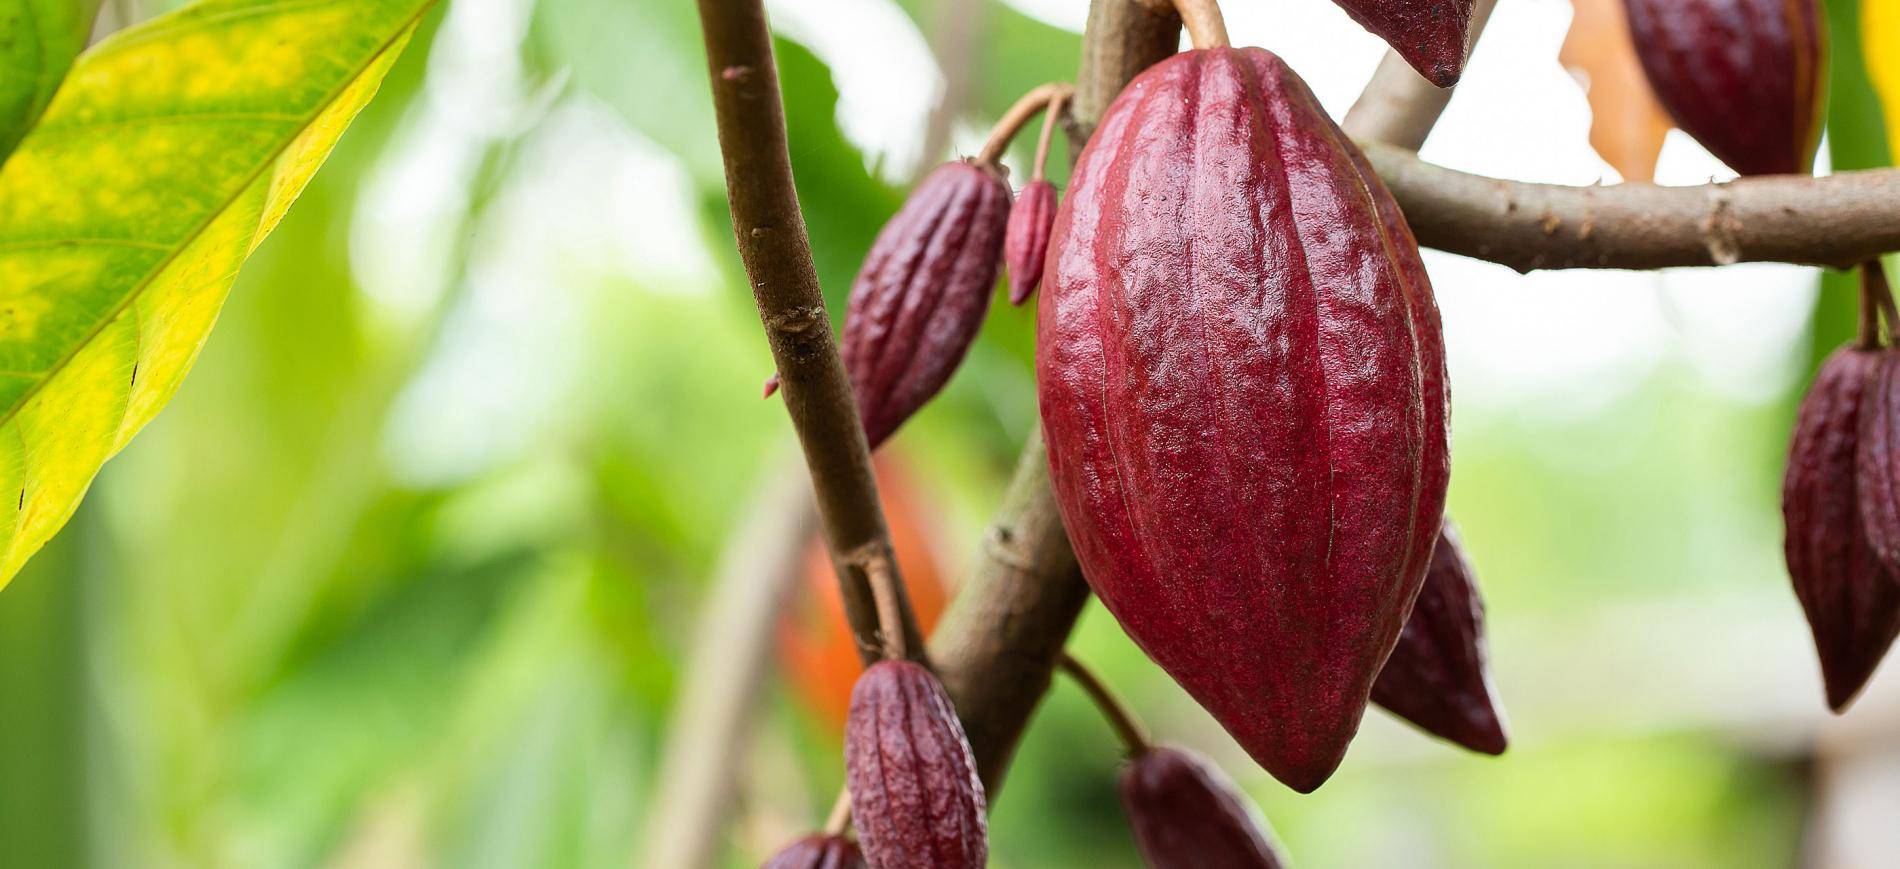 Barry Callebaut reveals the 4th type of chocolate: Ruby